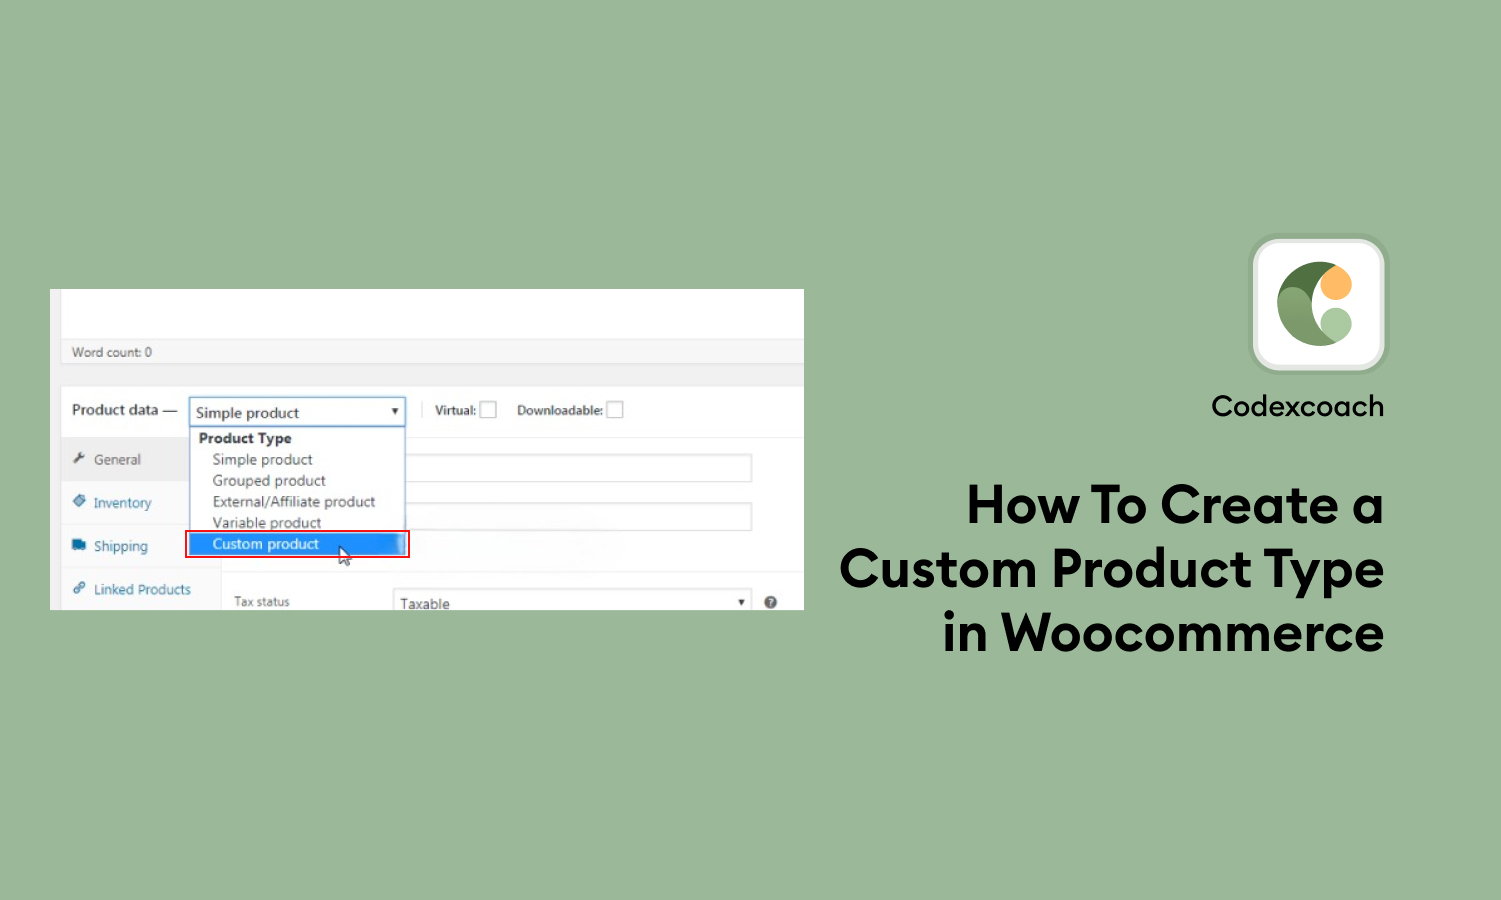 How To Create a Custom Product Type in Woocommerce